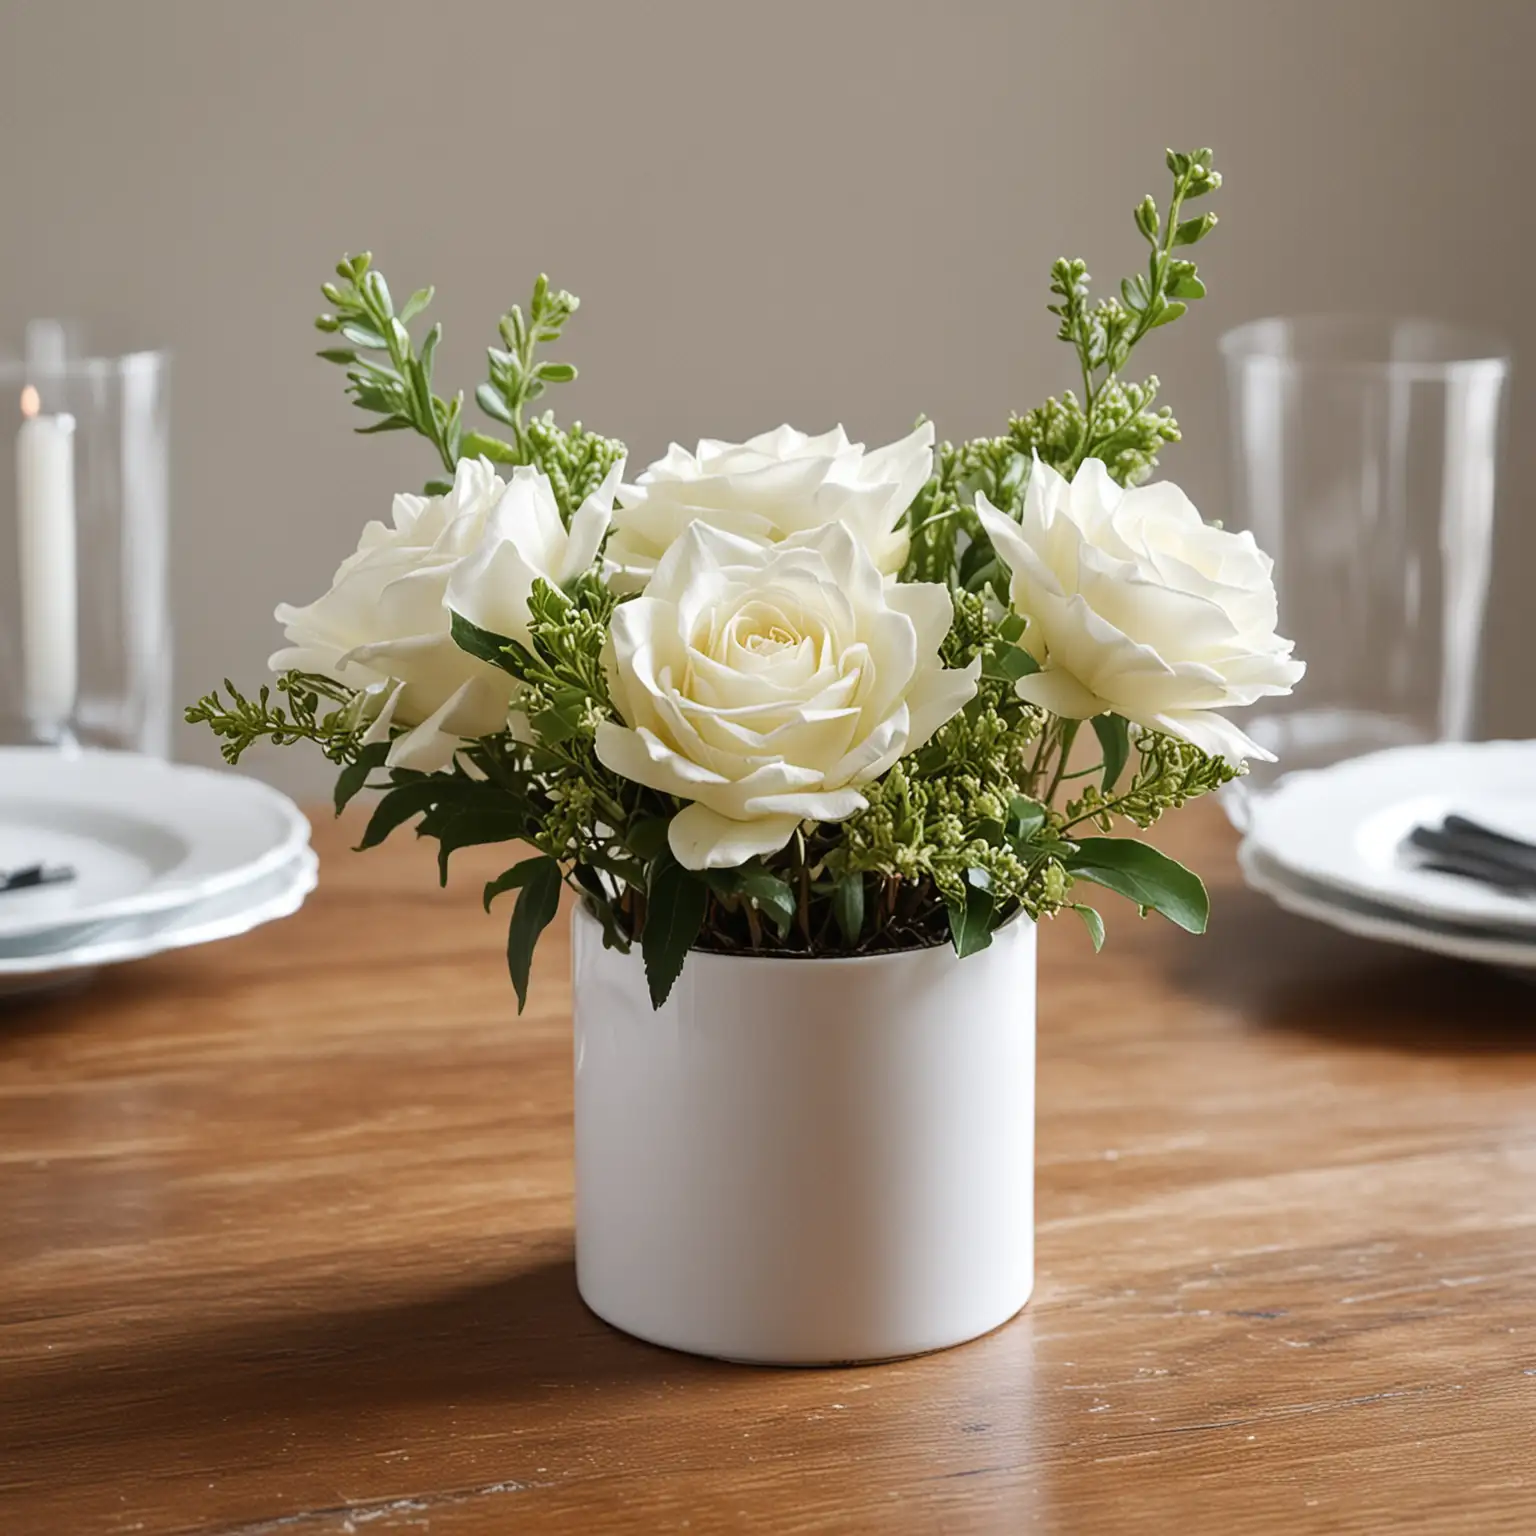 small and simple DIY elegant centerpiece with a white ceramic cylinder vase